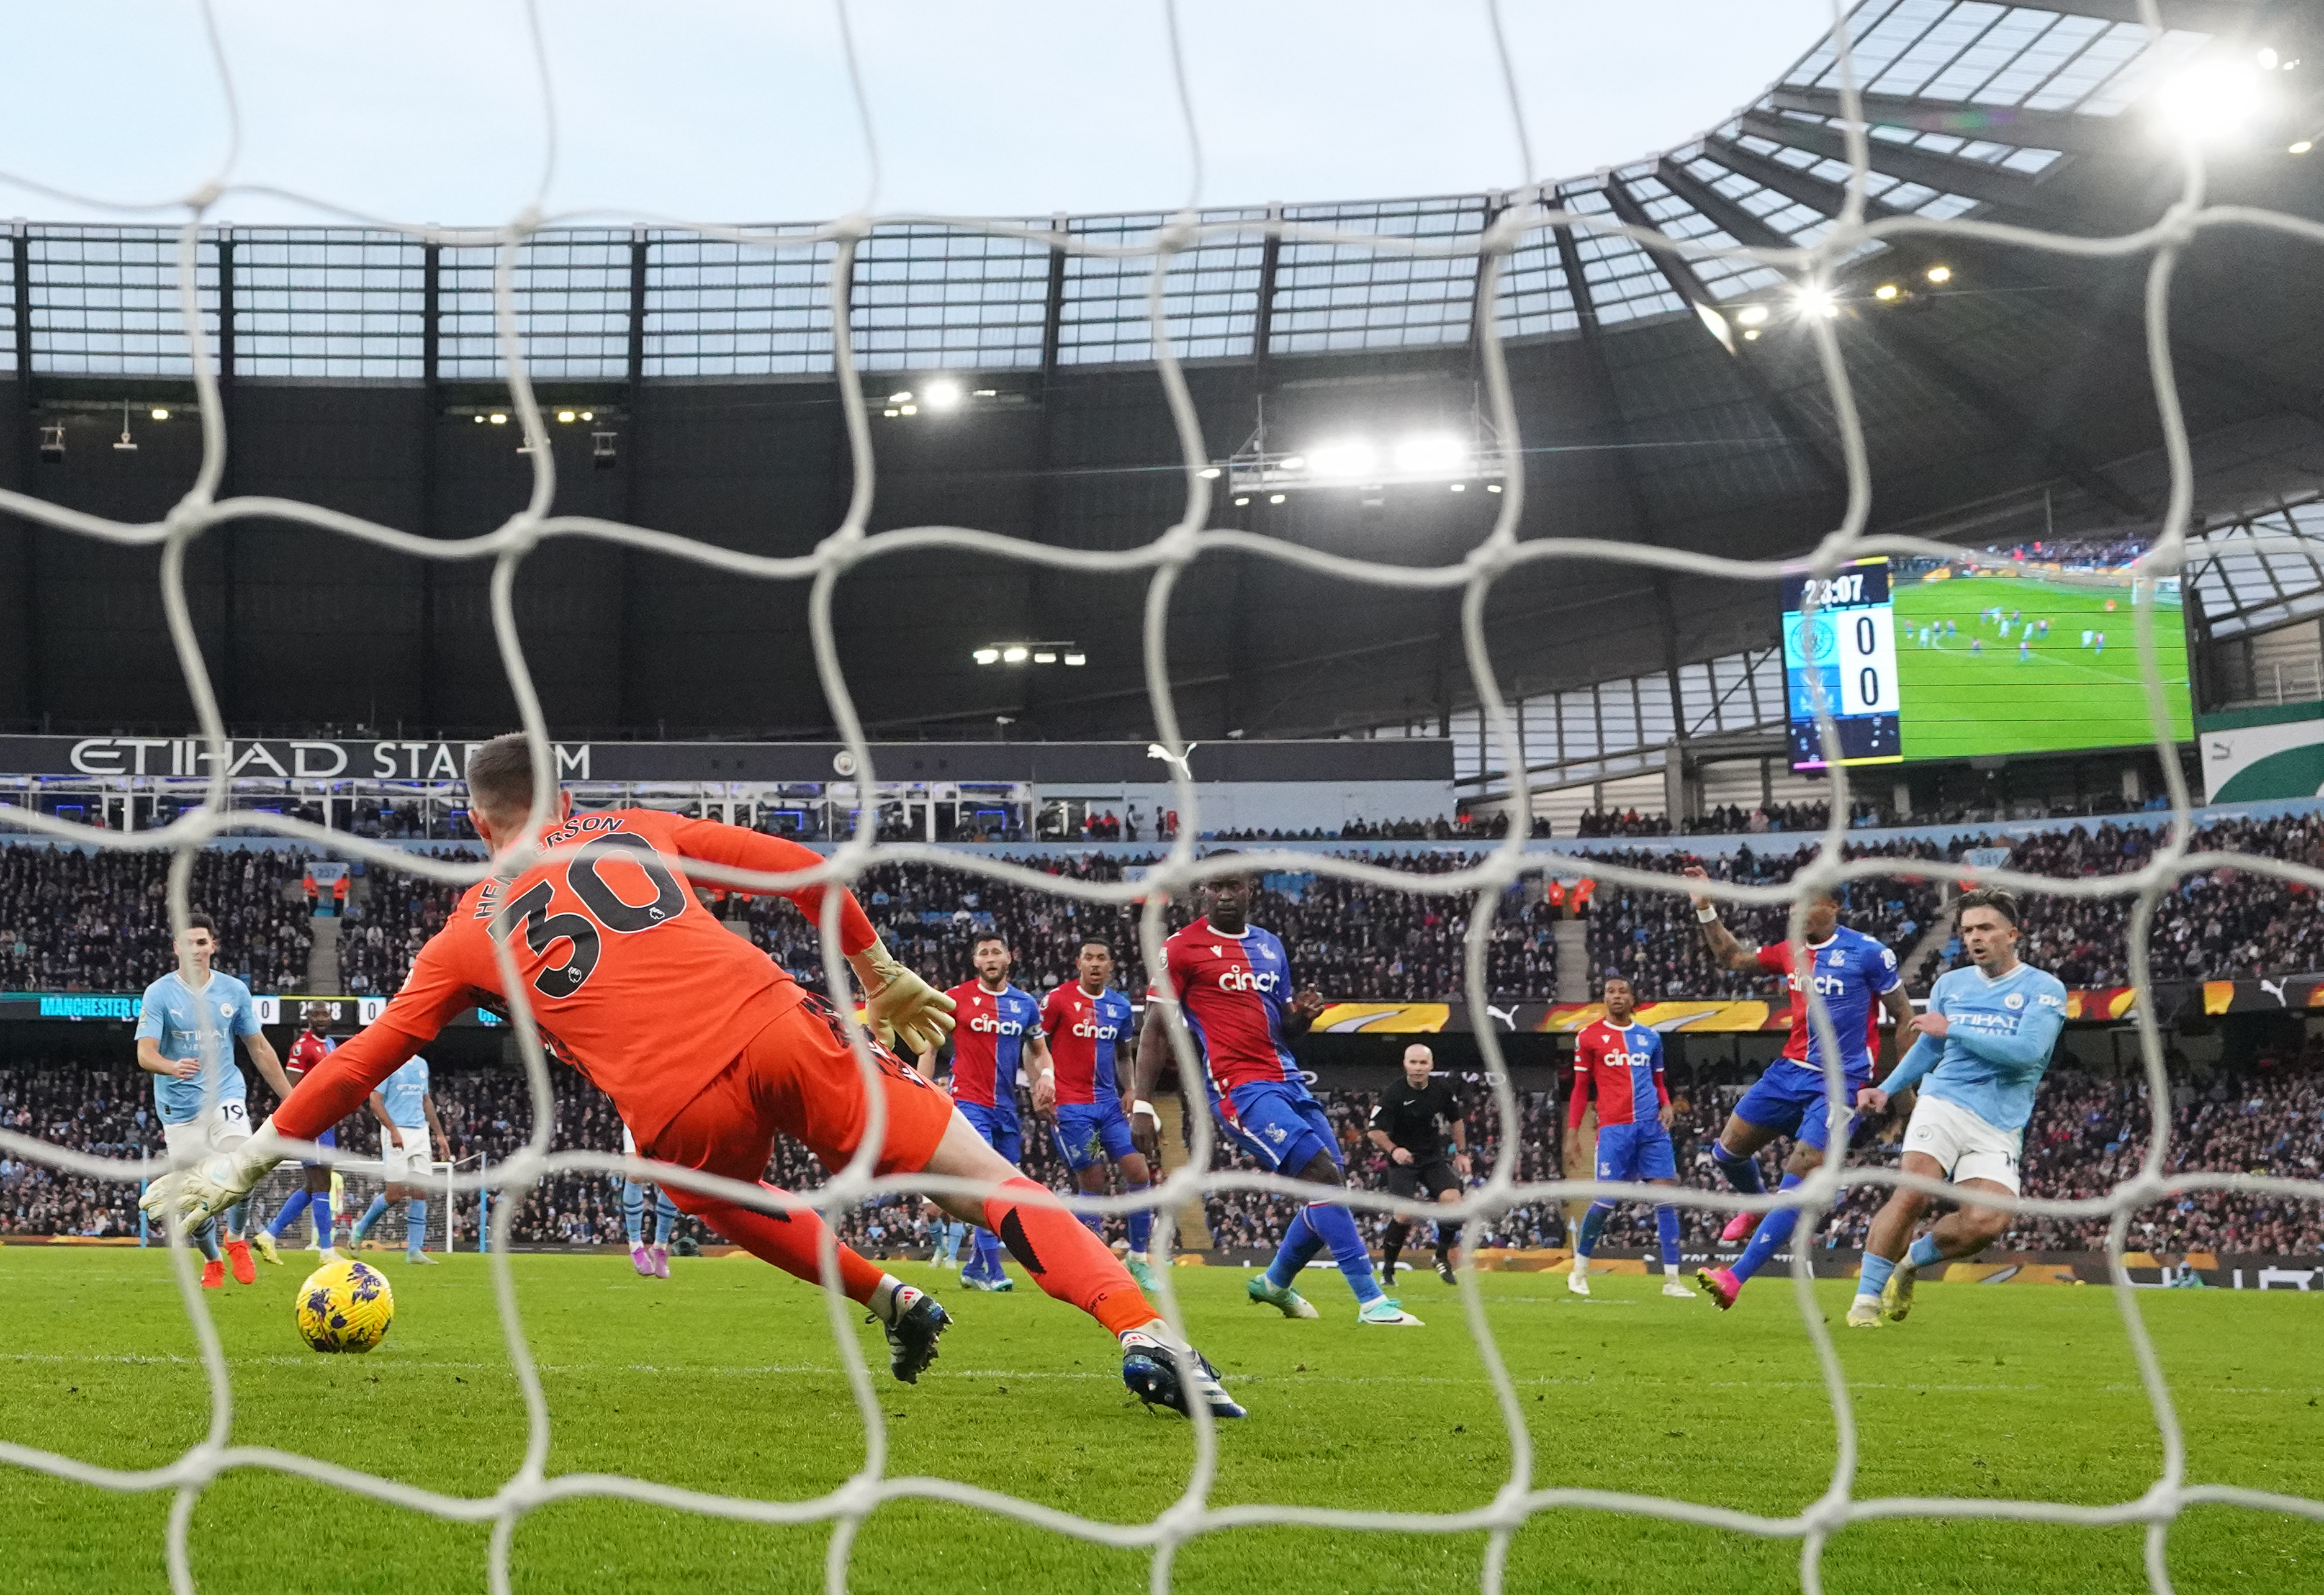 Premier League - A late penalty secures a point for